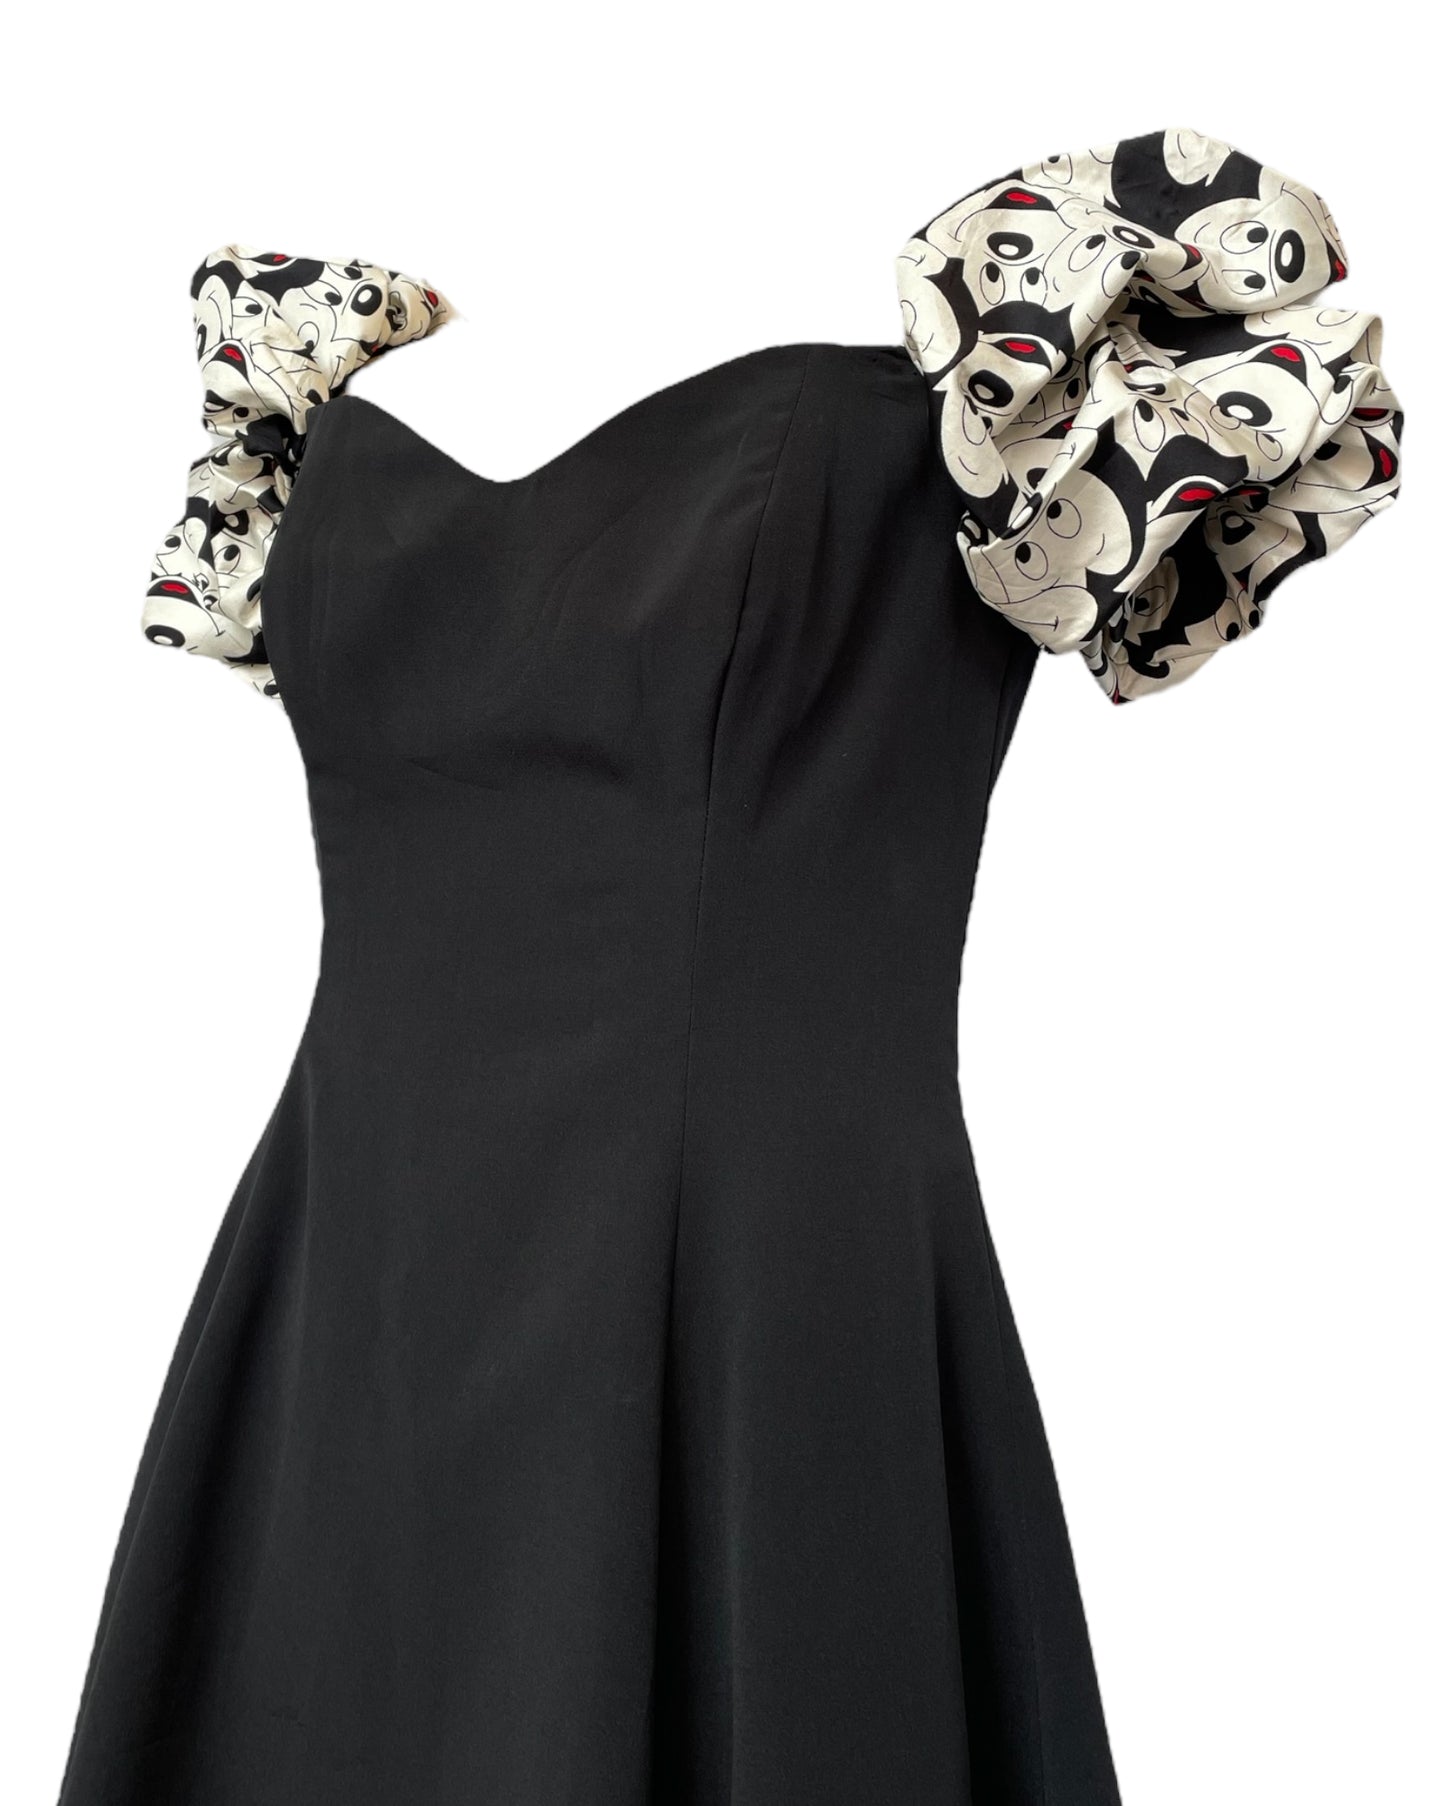 Contemporary Mickey Mouse Dress